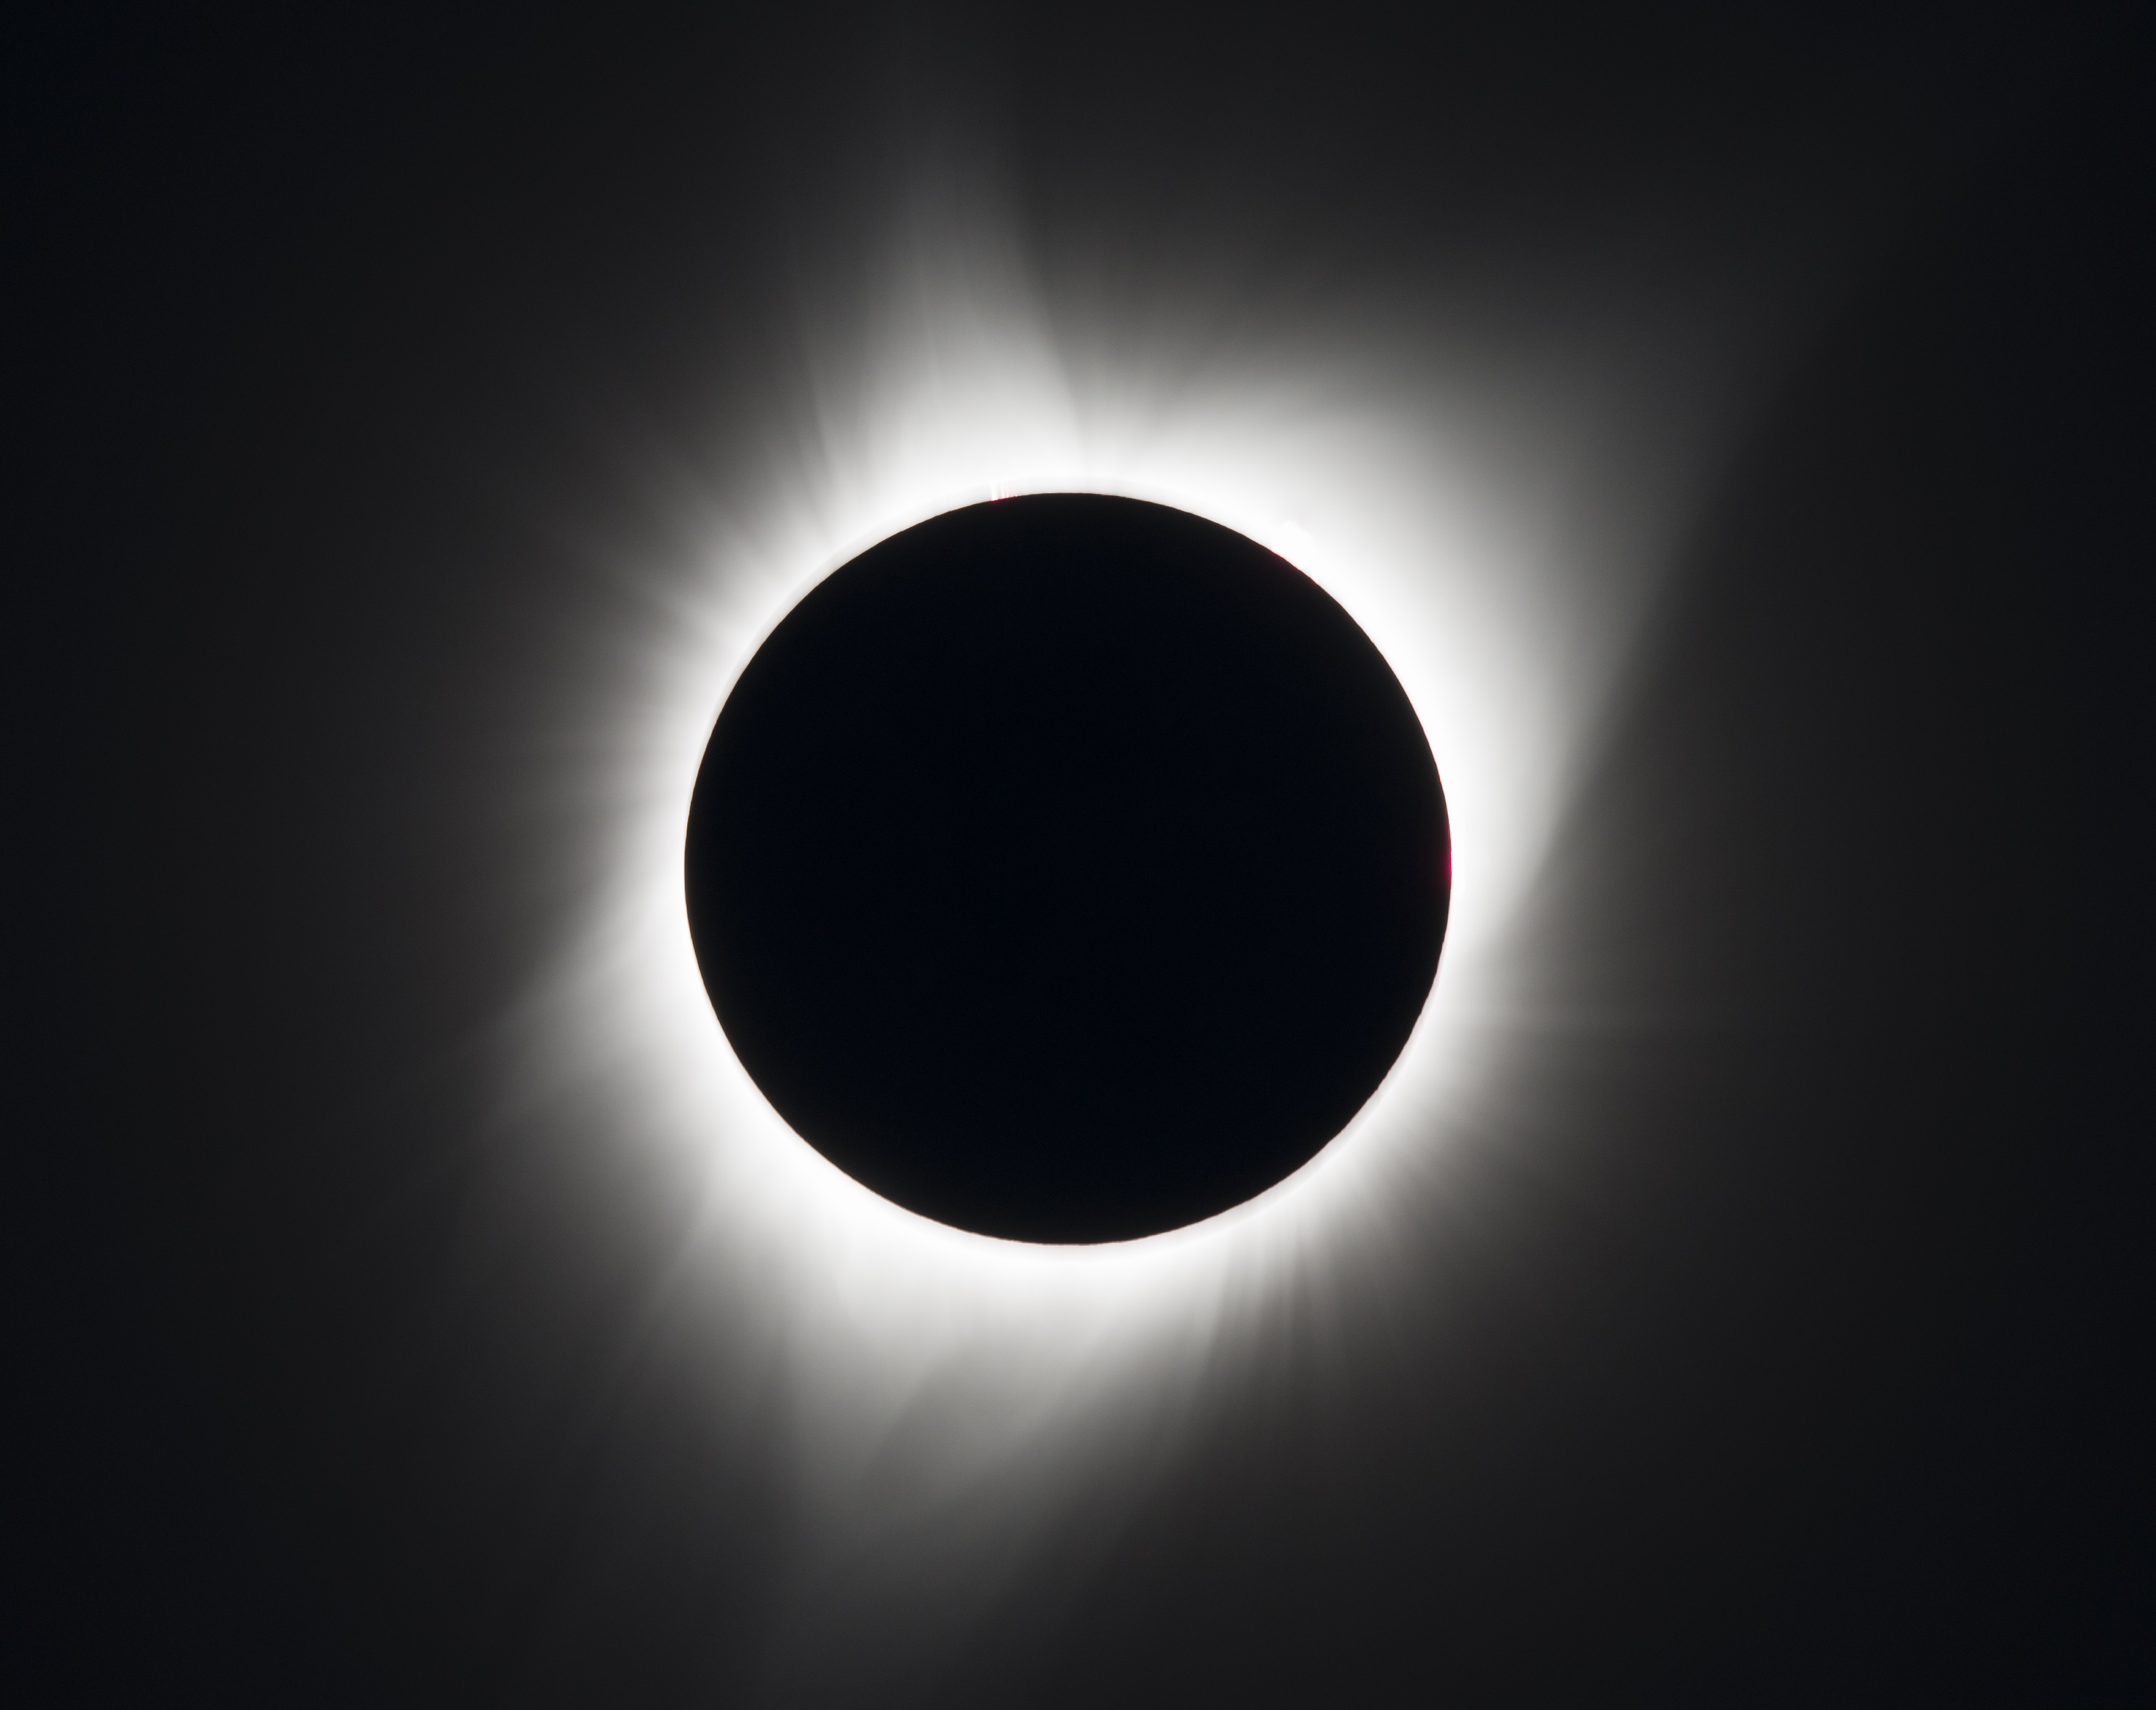 Sun blocked by Moon in total eclipse, with just the solar corona visible as a glow around the silhouetted Moon